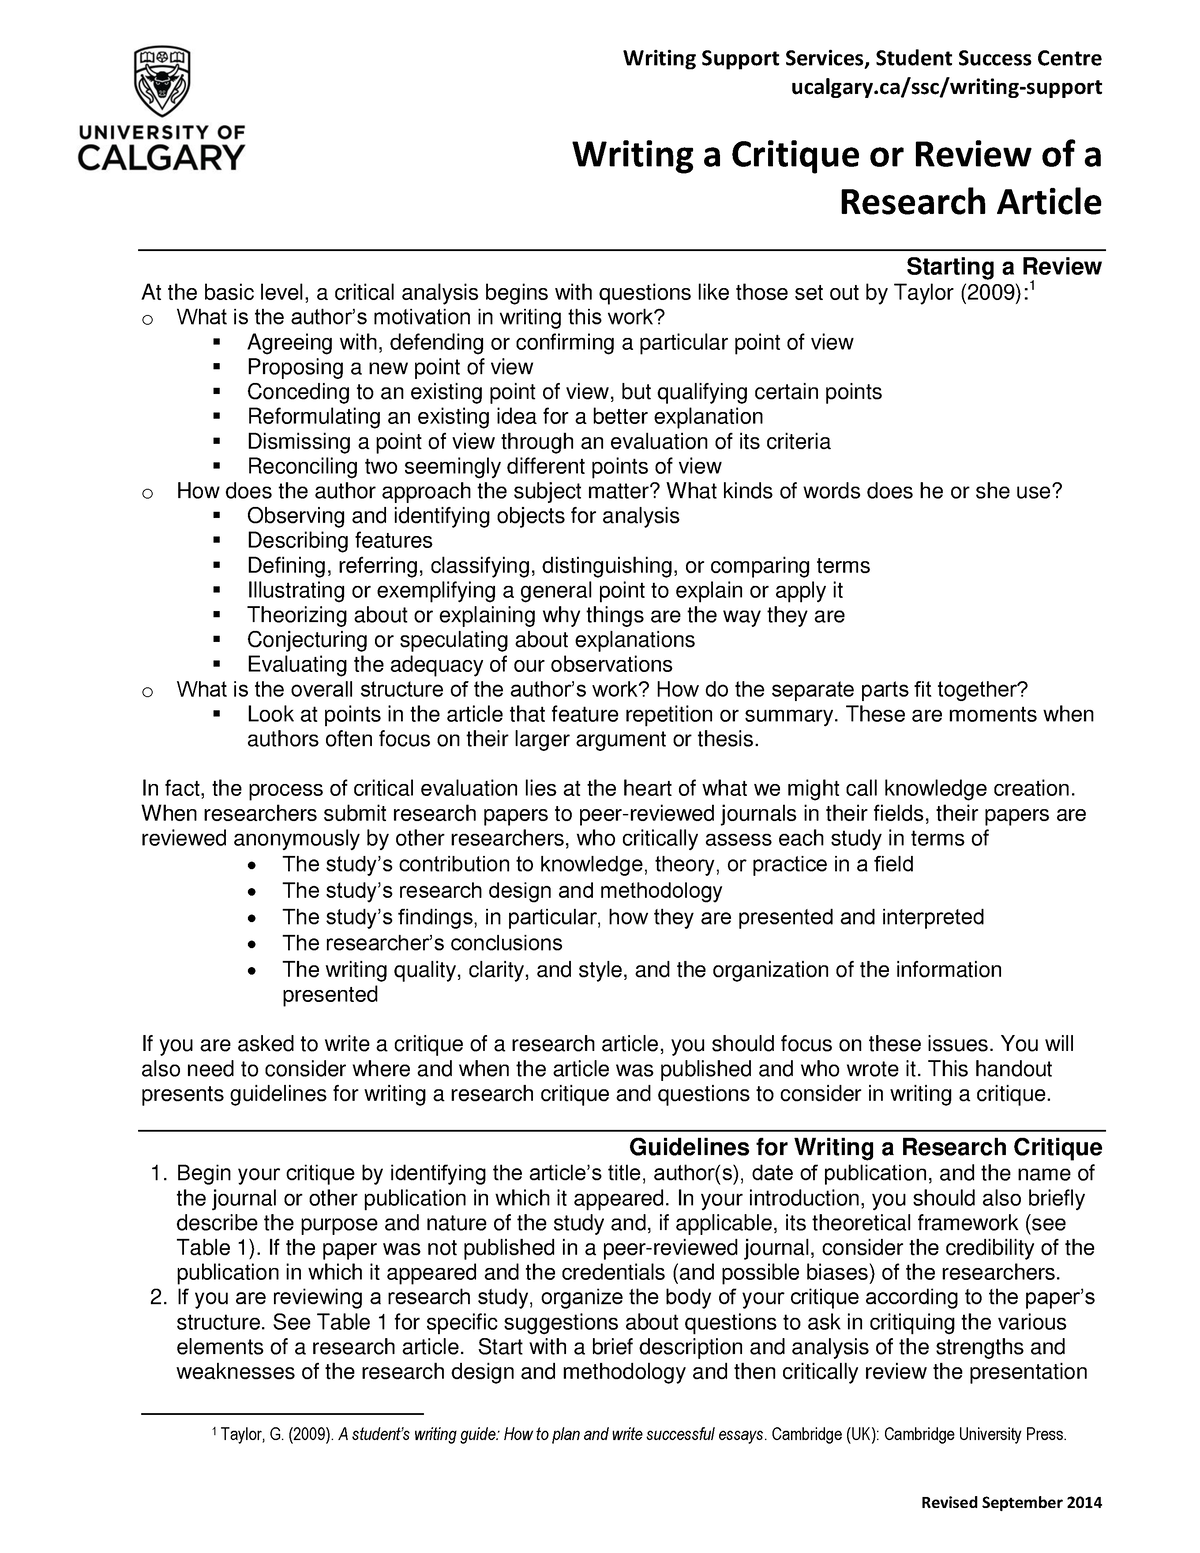 how to write a critique on a research article